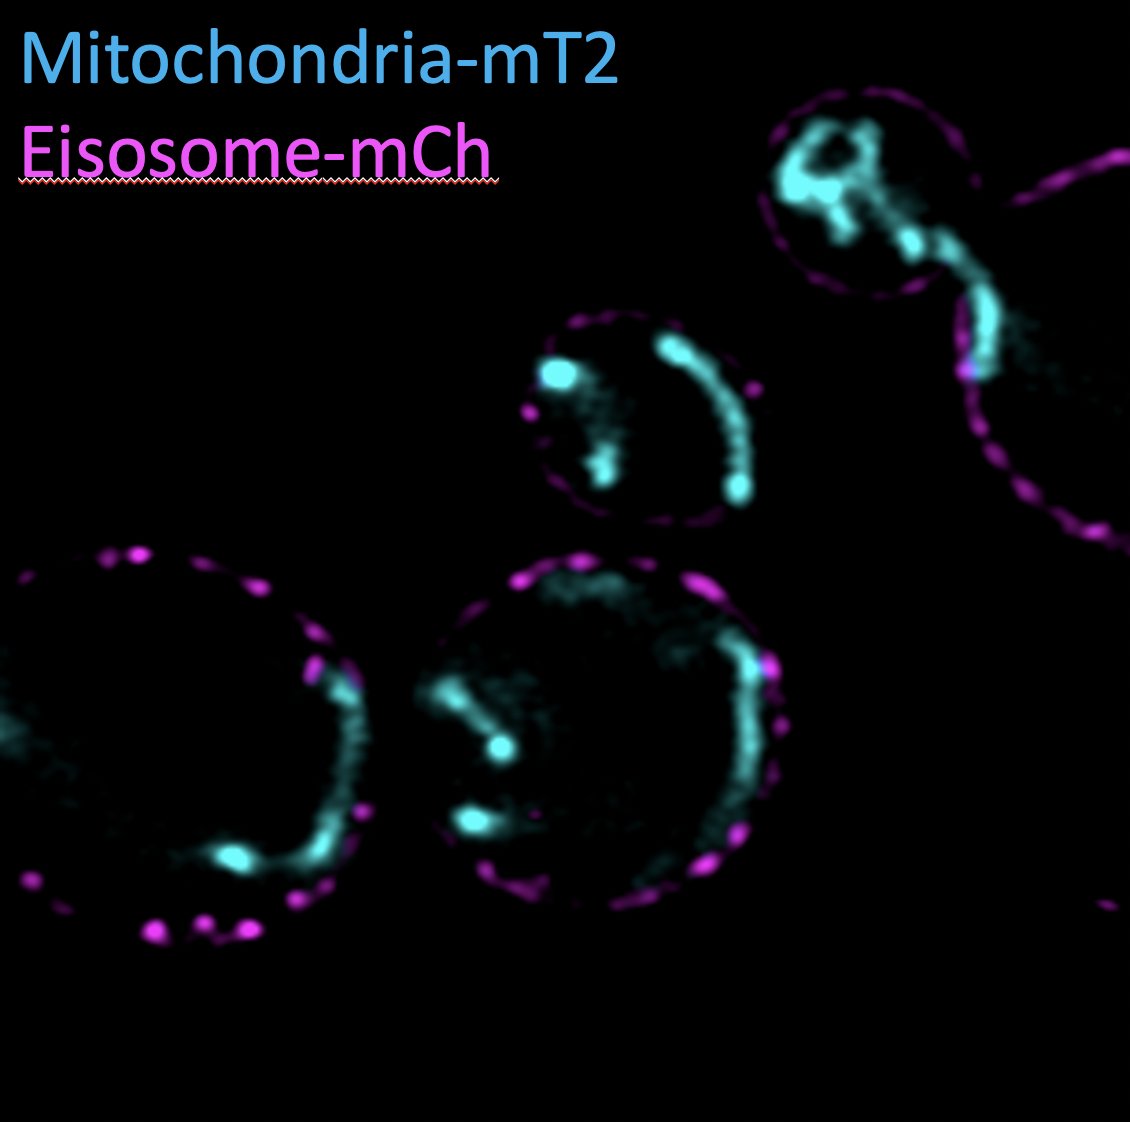 Have not got to mStayGold yet but after @joachimgoedhart mentioned the value of sharing FP data expressed from different systems, I recently codon optimised mTurquoise2 for expression in yeast (example labelling mitochondria @YorkBioimaging) and it works brilliantly!